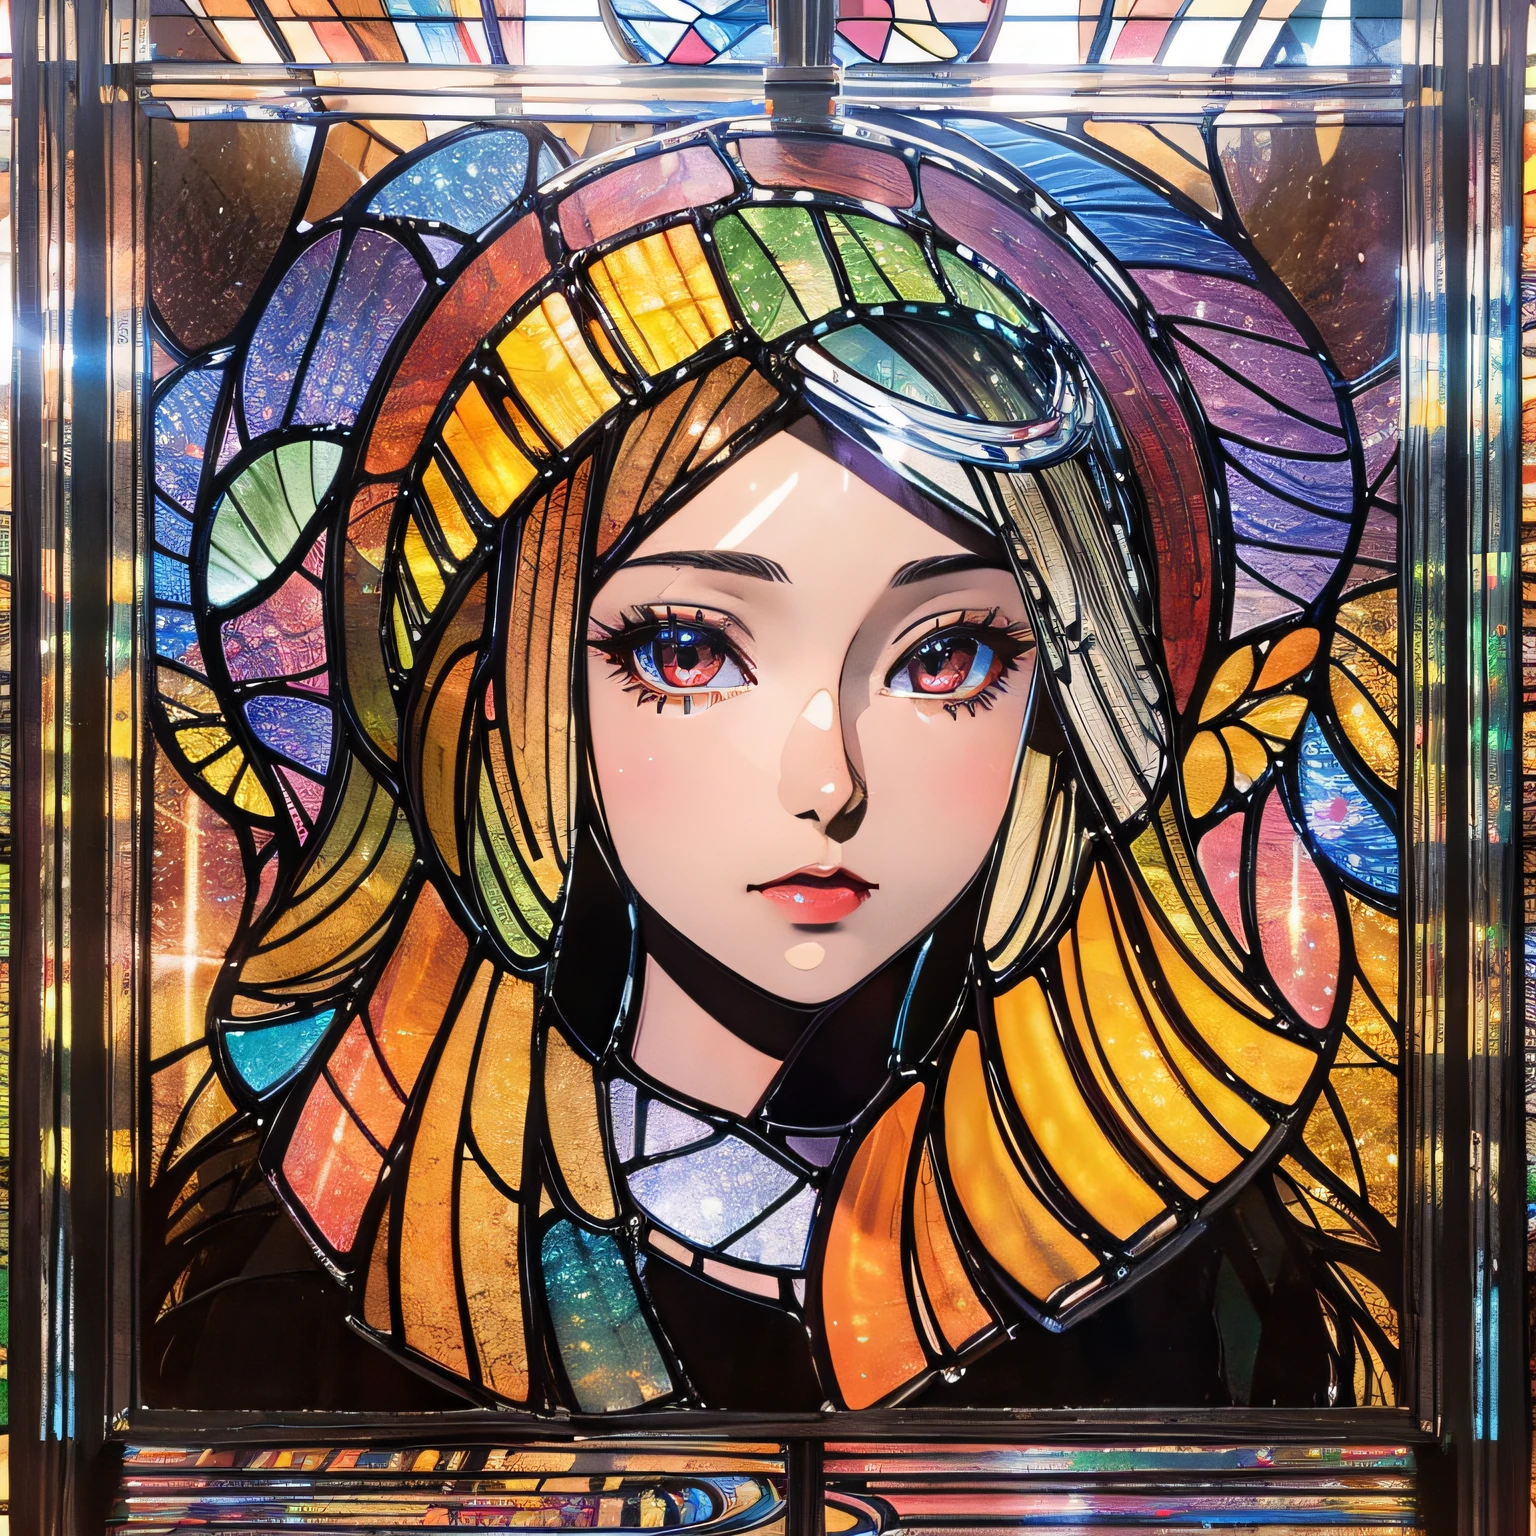 (masutepiece, of the highest quality, Best Quality,Official art, Beautiful and aesthetic:1.2),(1girl in:1.3), 1 Girl BREAK Stained Glass Art, Colored Glass, Lead Line, Light transmission breaks bright colors, intricate designs, luminous effect, Spiritual atmosphere